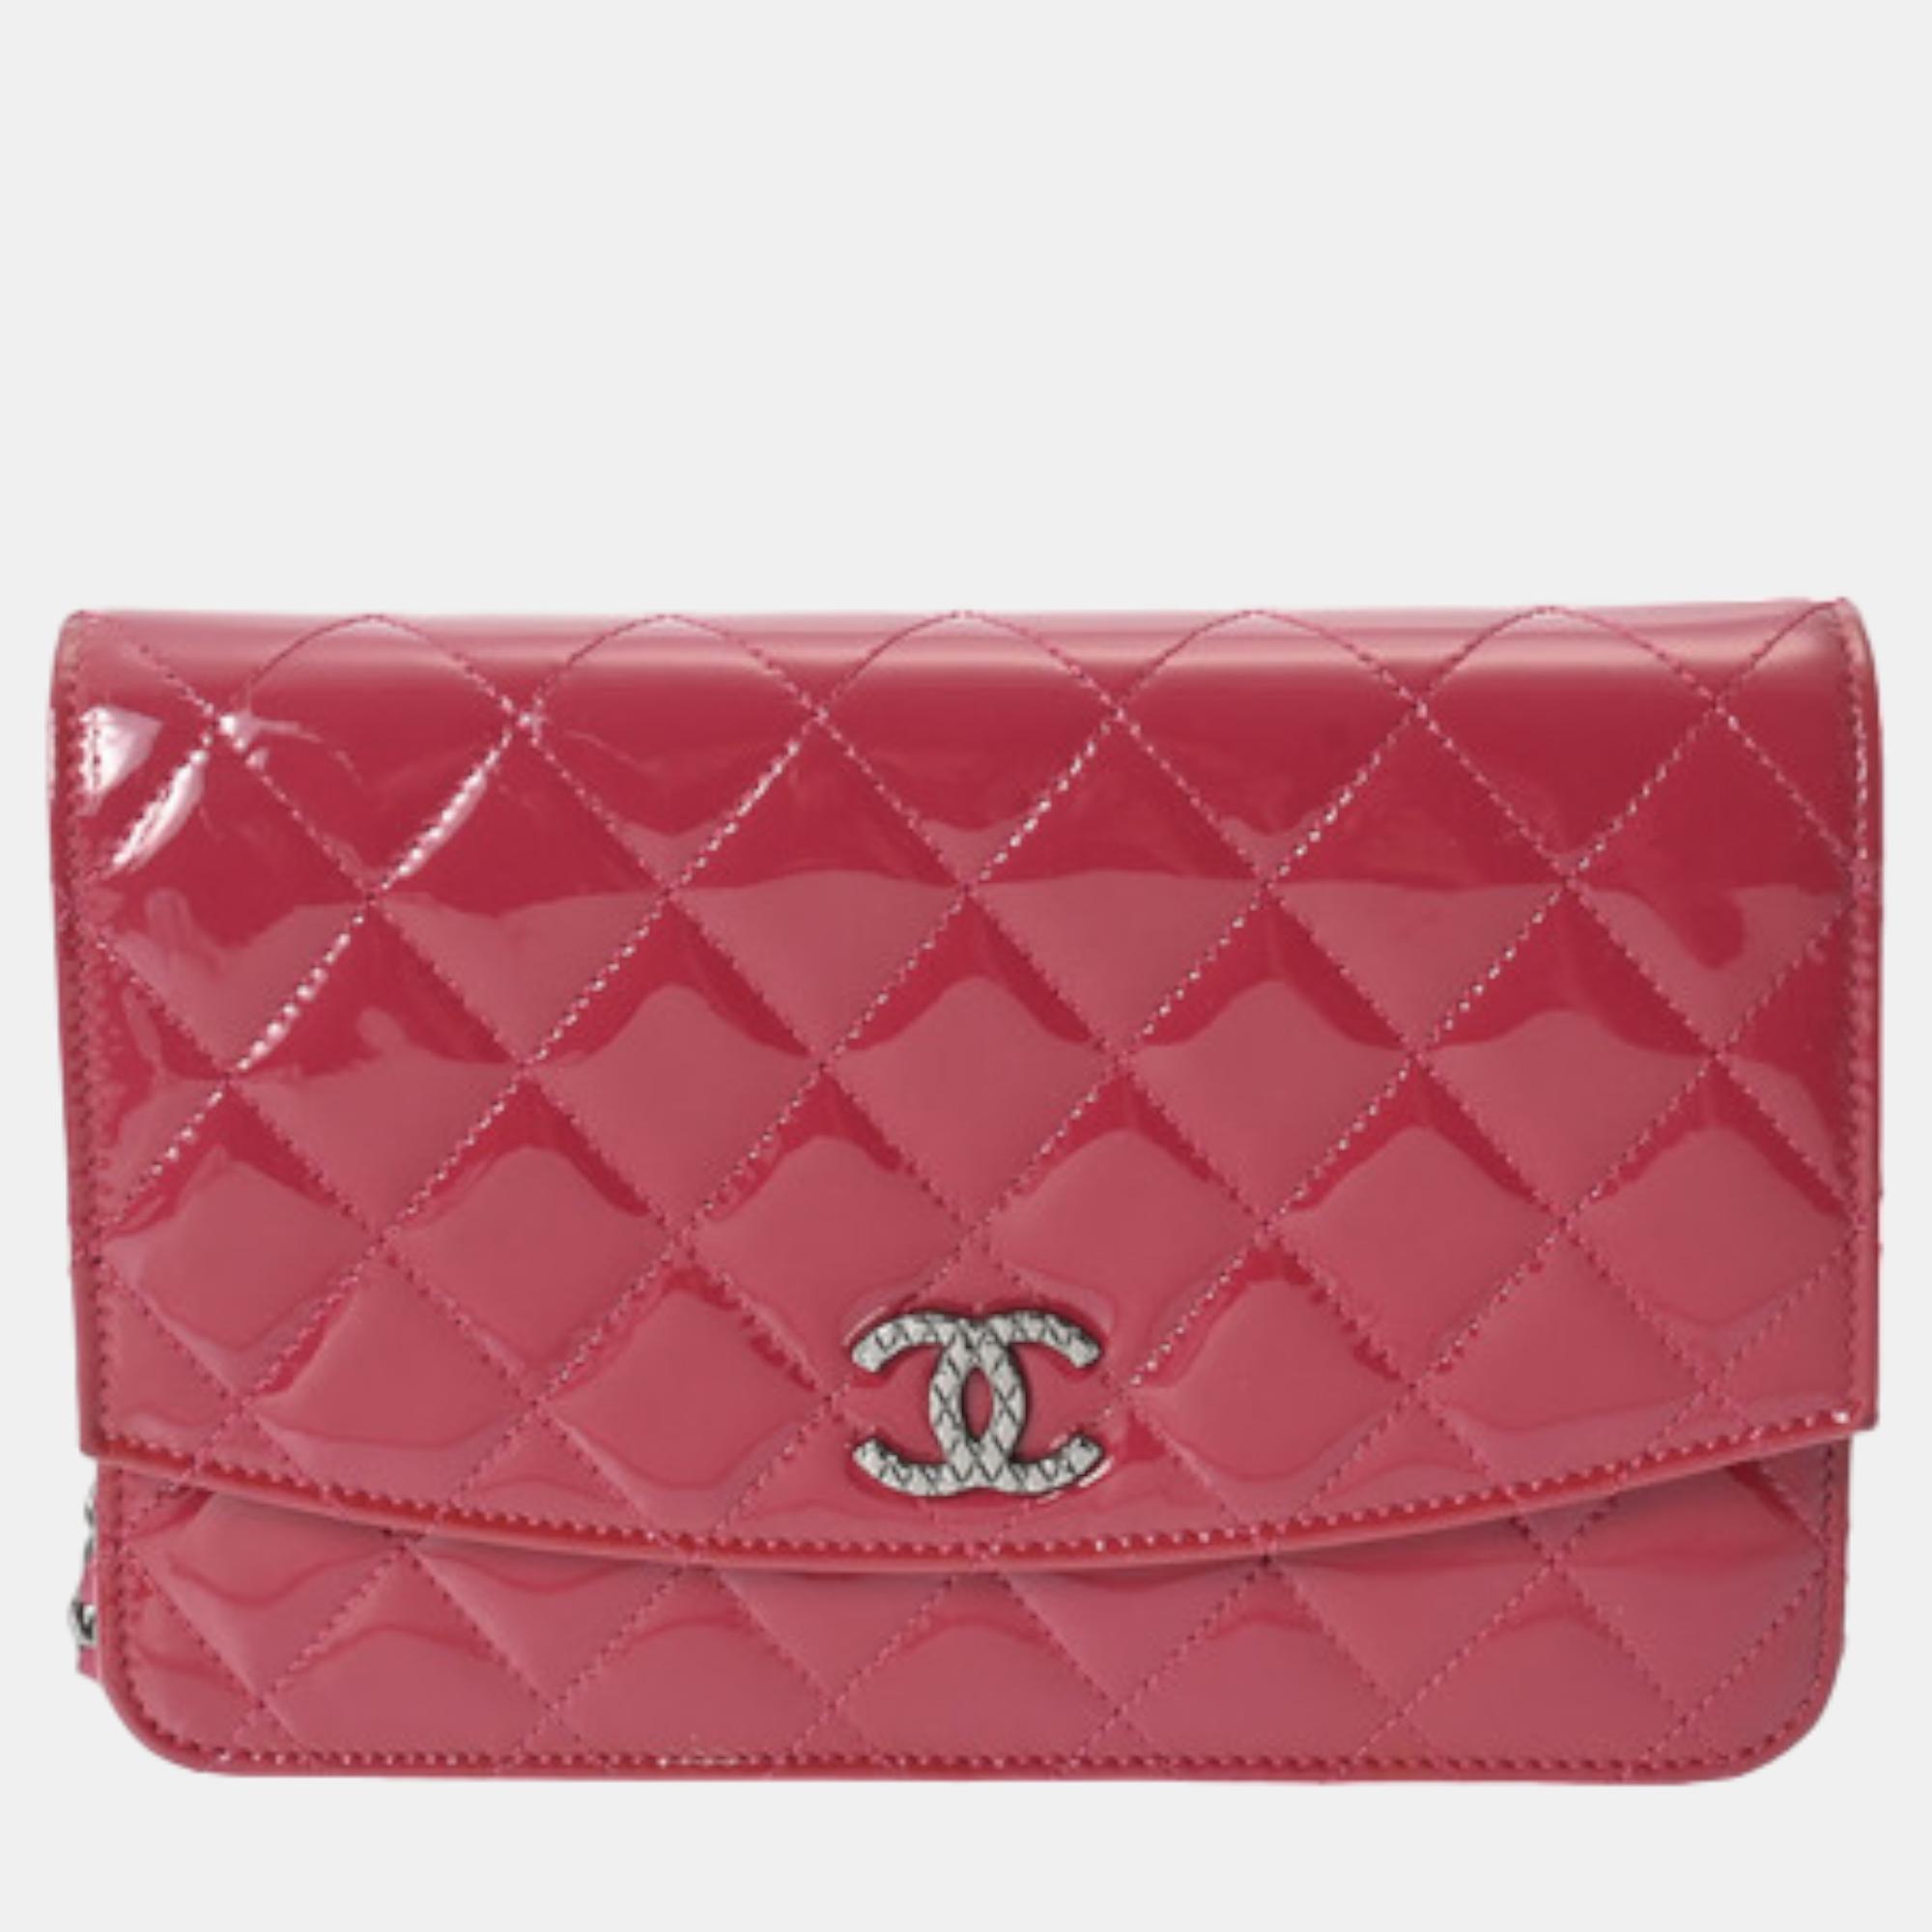 Chanel pink patent leather classic wallet on chain